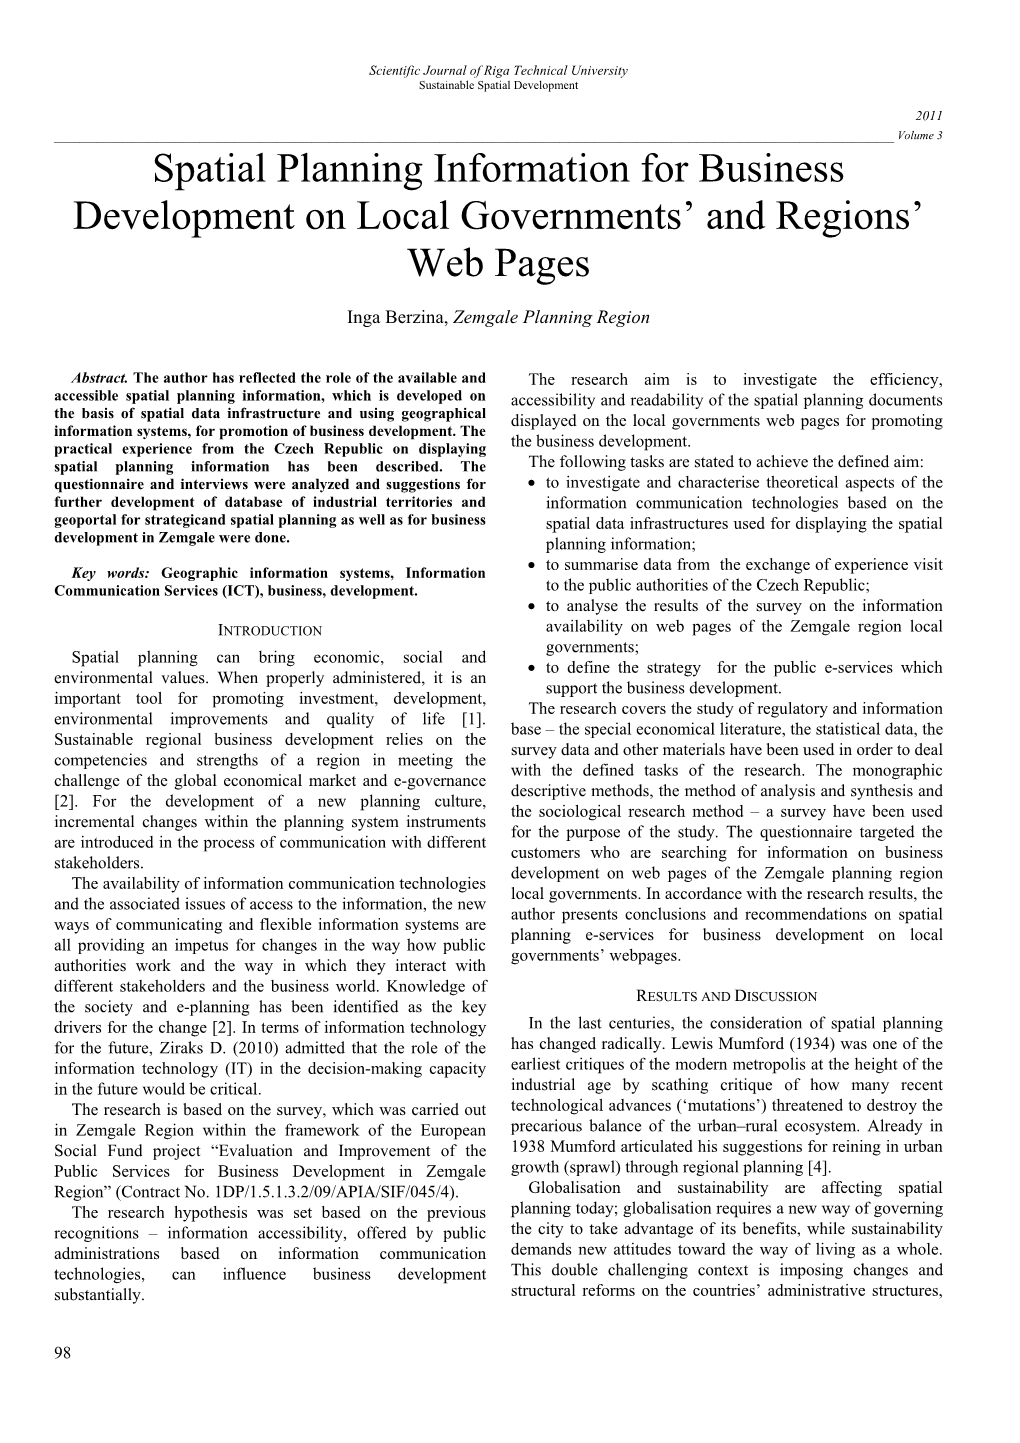 Spatial Planning Information for Business Development on Local Governments’ and Regions’ Web Pages